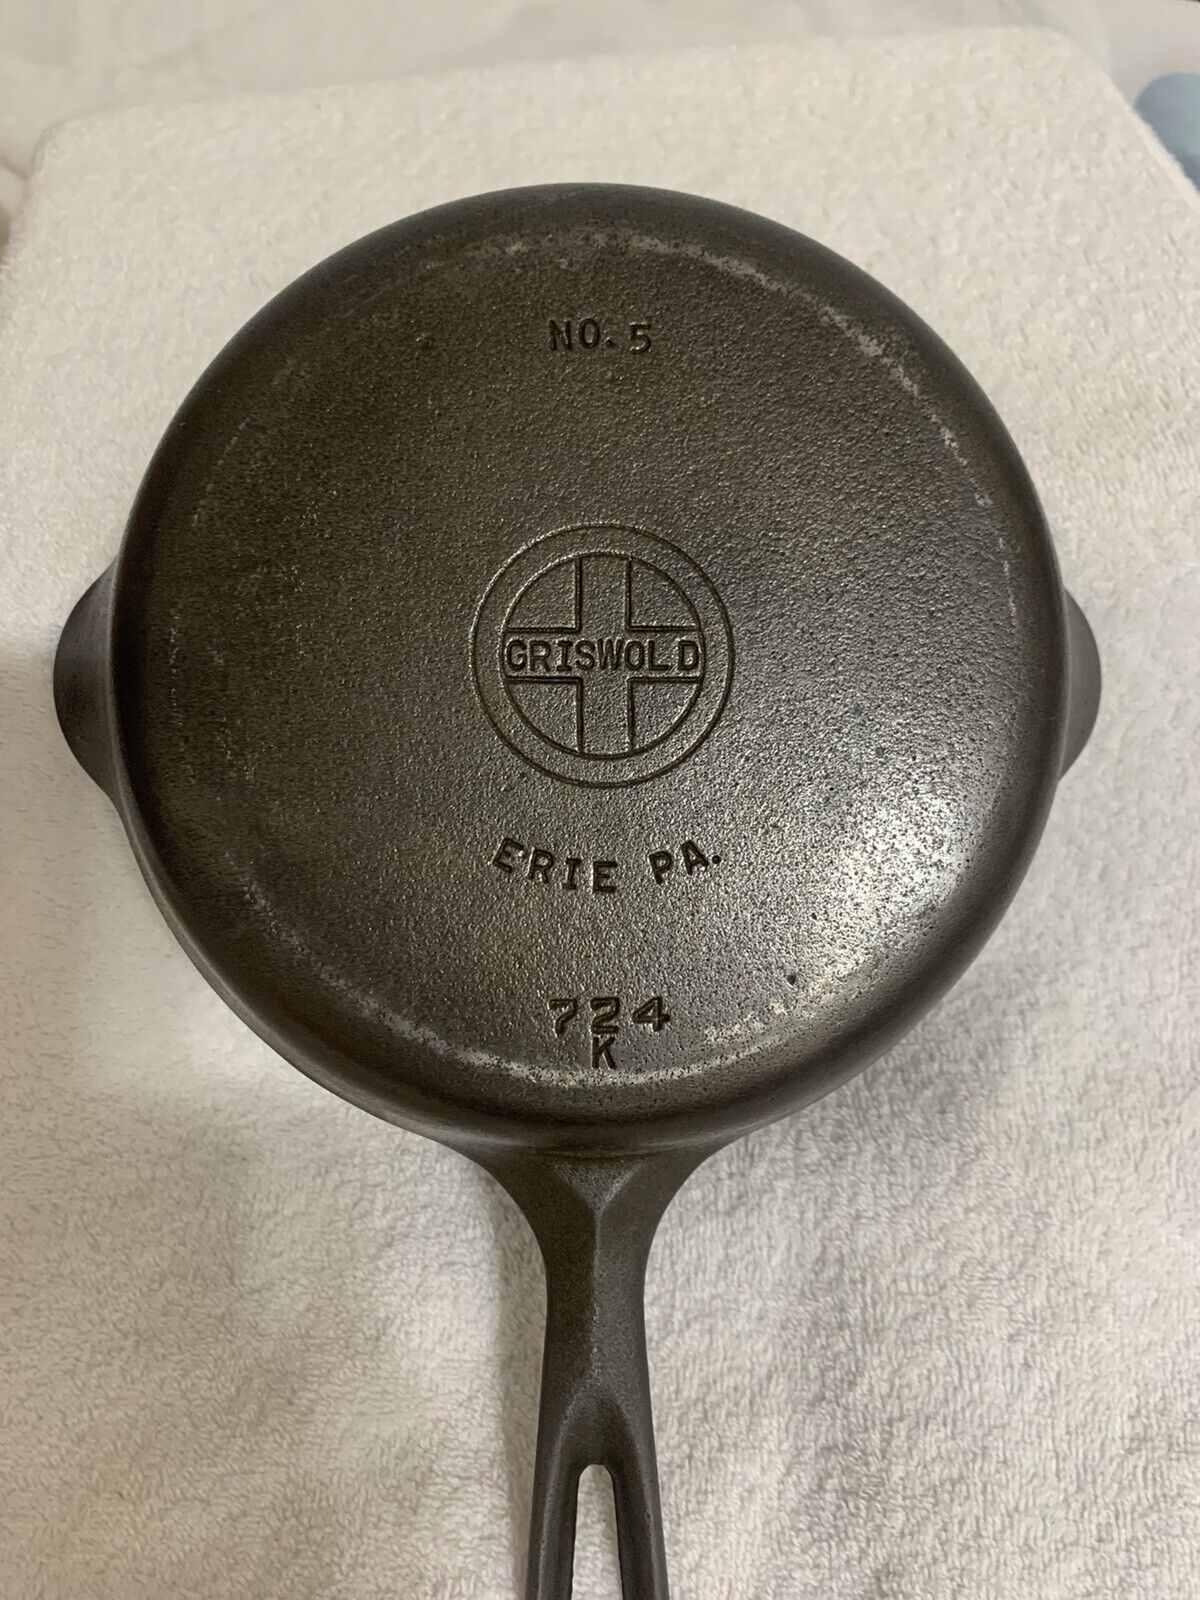 Griswold Cast Iron Skillet No. 5 Small Block Logo Erie PA. 724 K Sits Flat LQQK